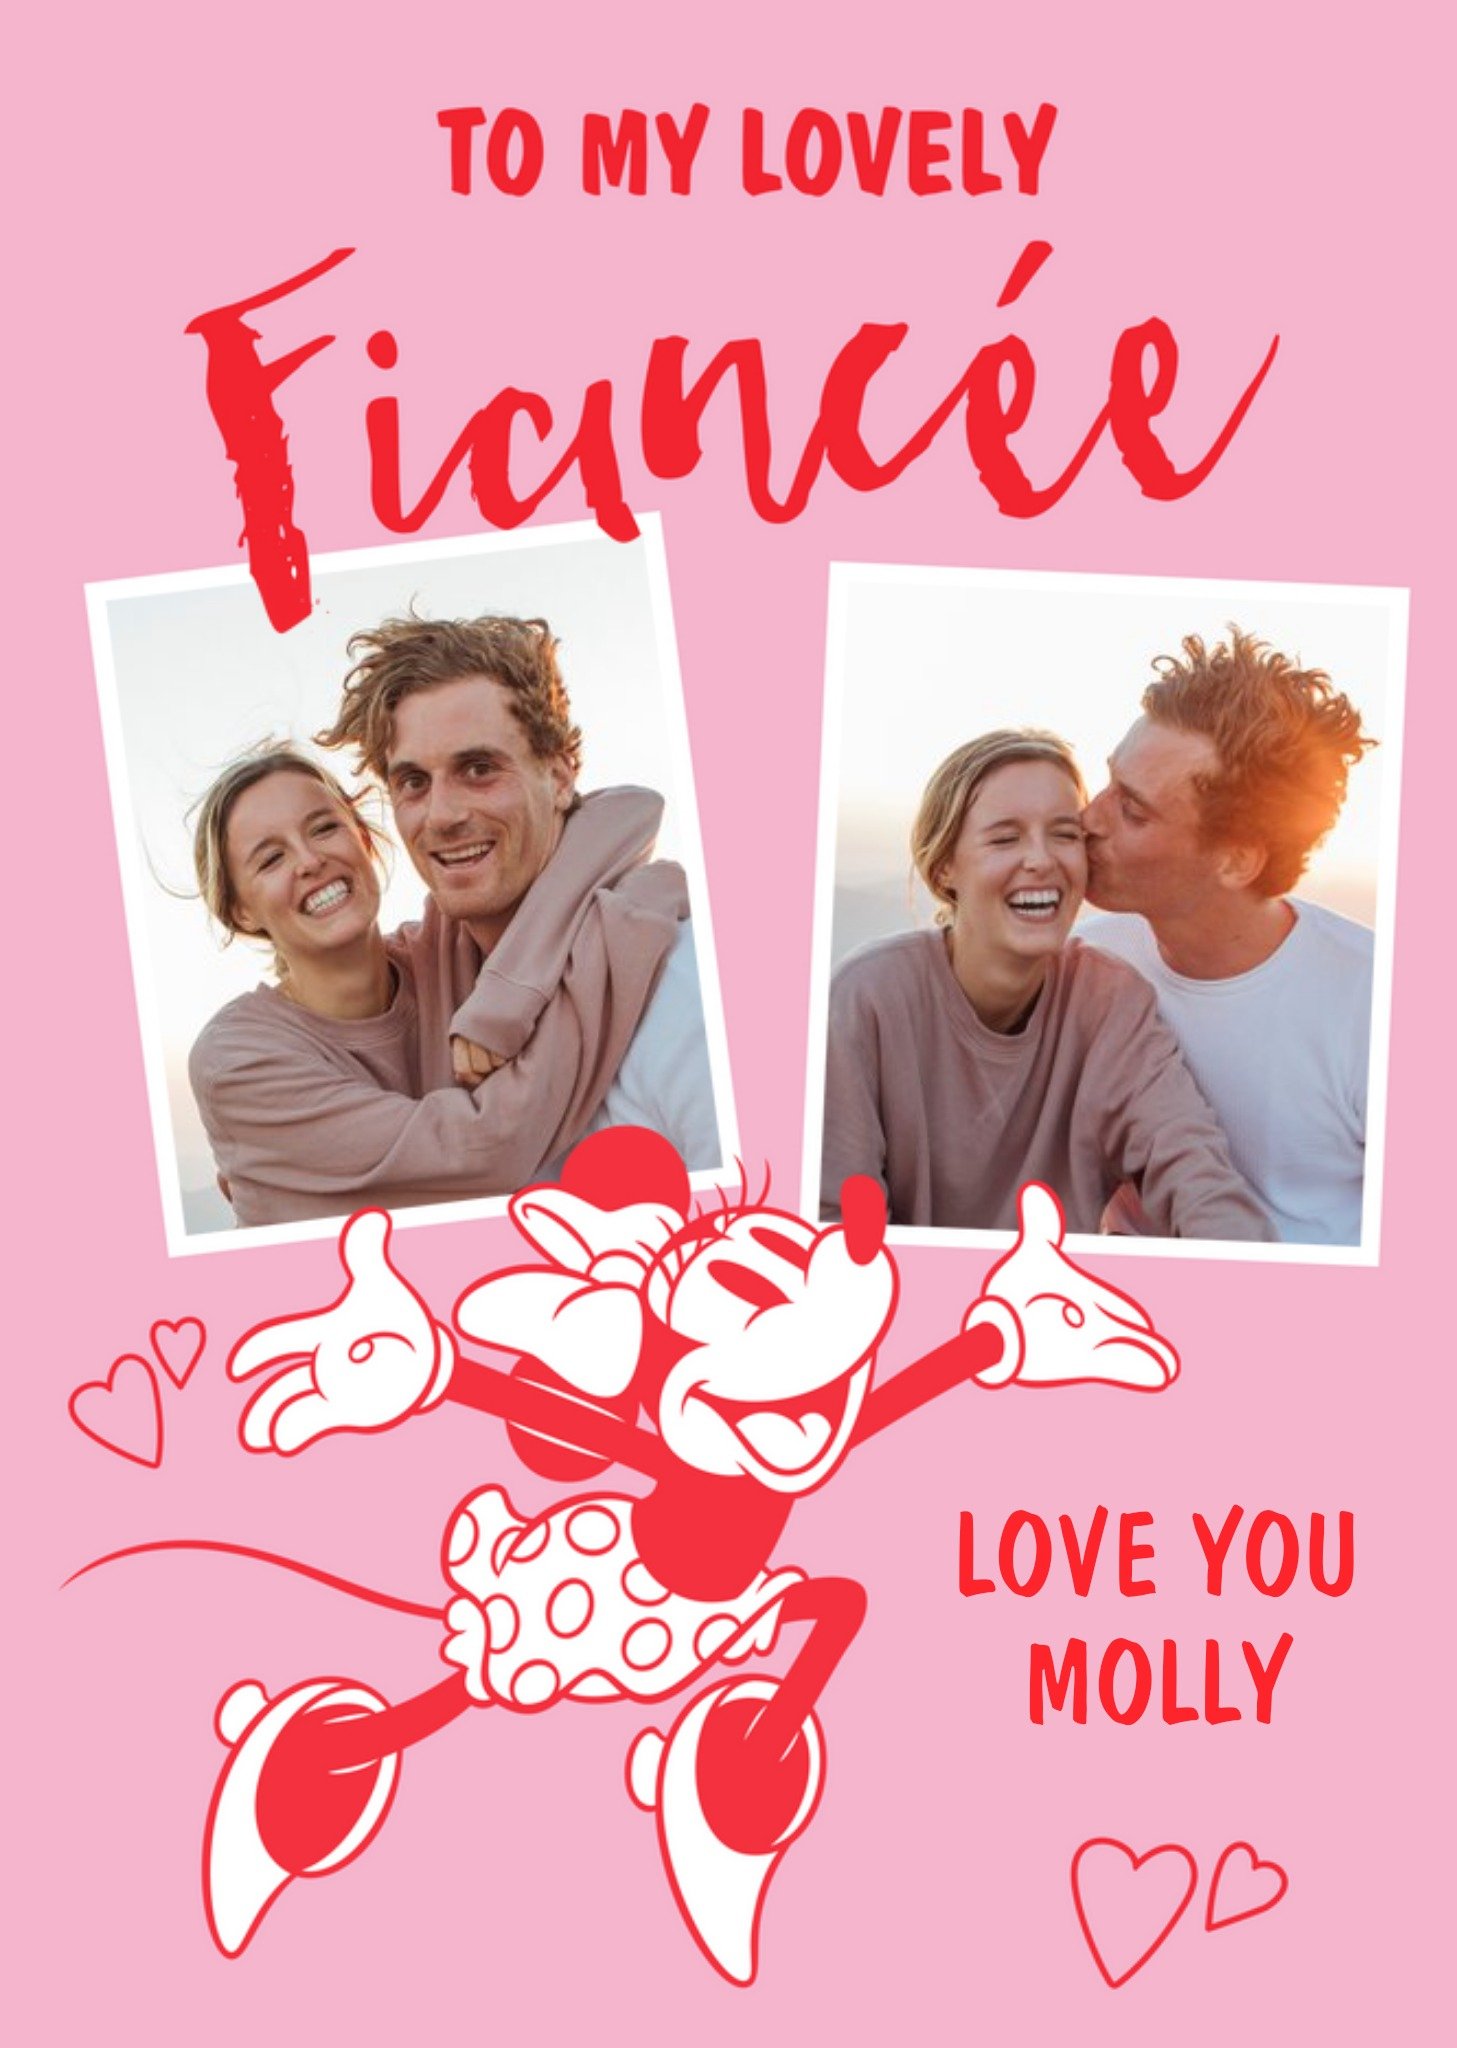 Mickey Mouse Minnie Mouse Lovely Fiancee Photo Upload Valentine's Day Card Ecard